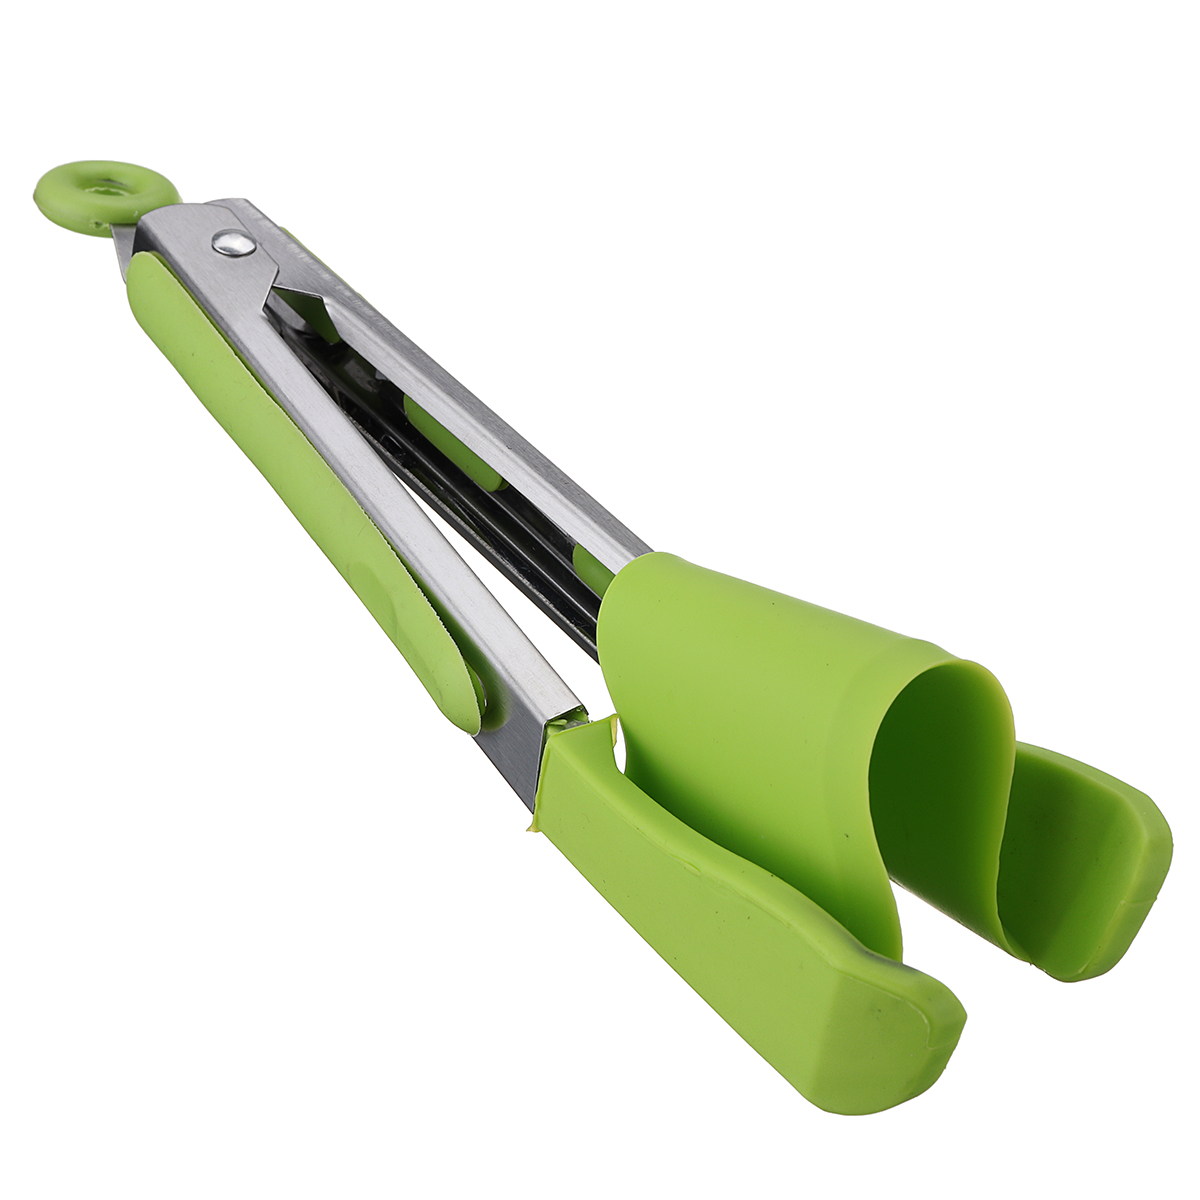 2-in-1--Non-stick-Clever-Tongs-Heat-Resistant-Silicone-Spatula-Cooking-Food-Clip-Camping-Picnic-BBQ-1329346-8